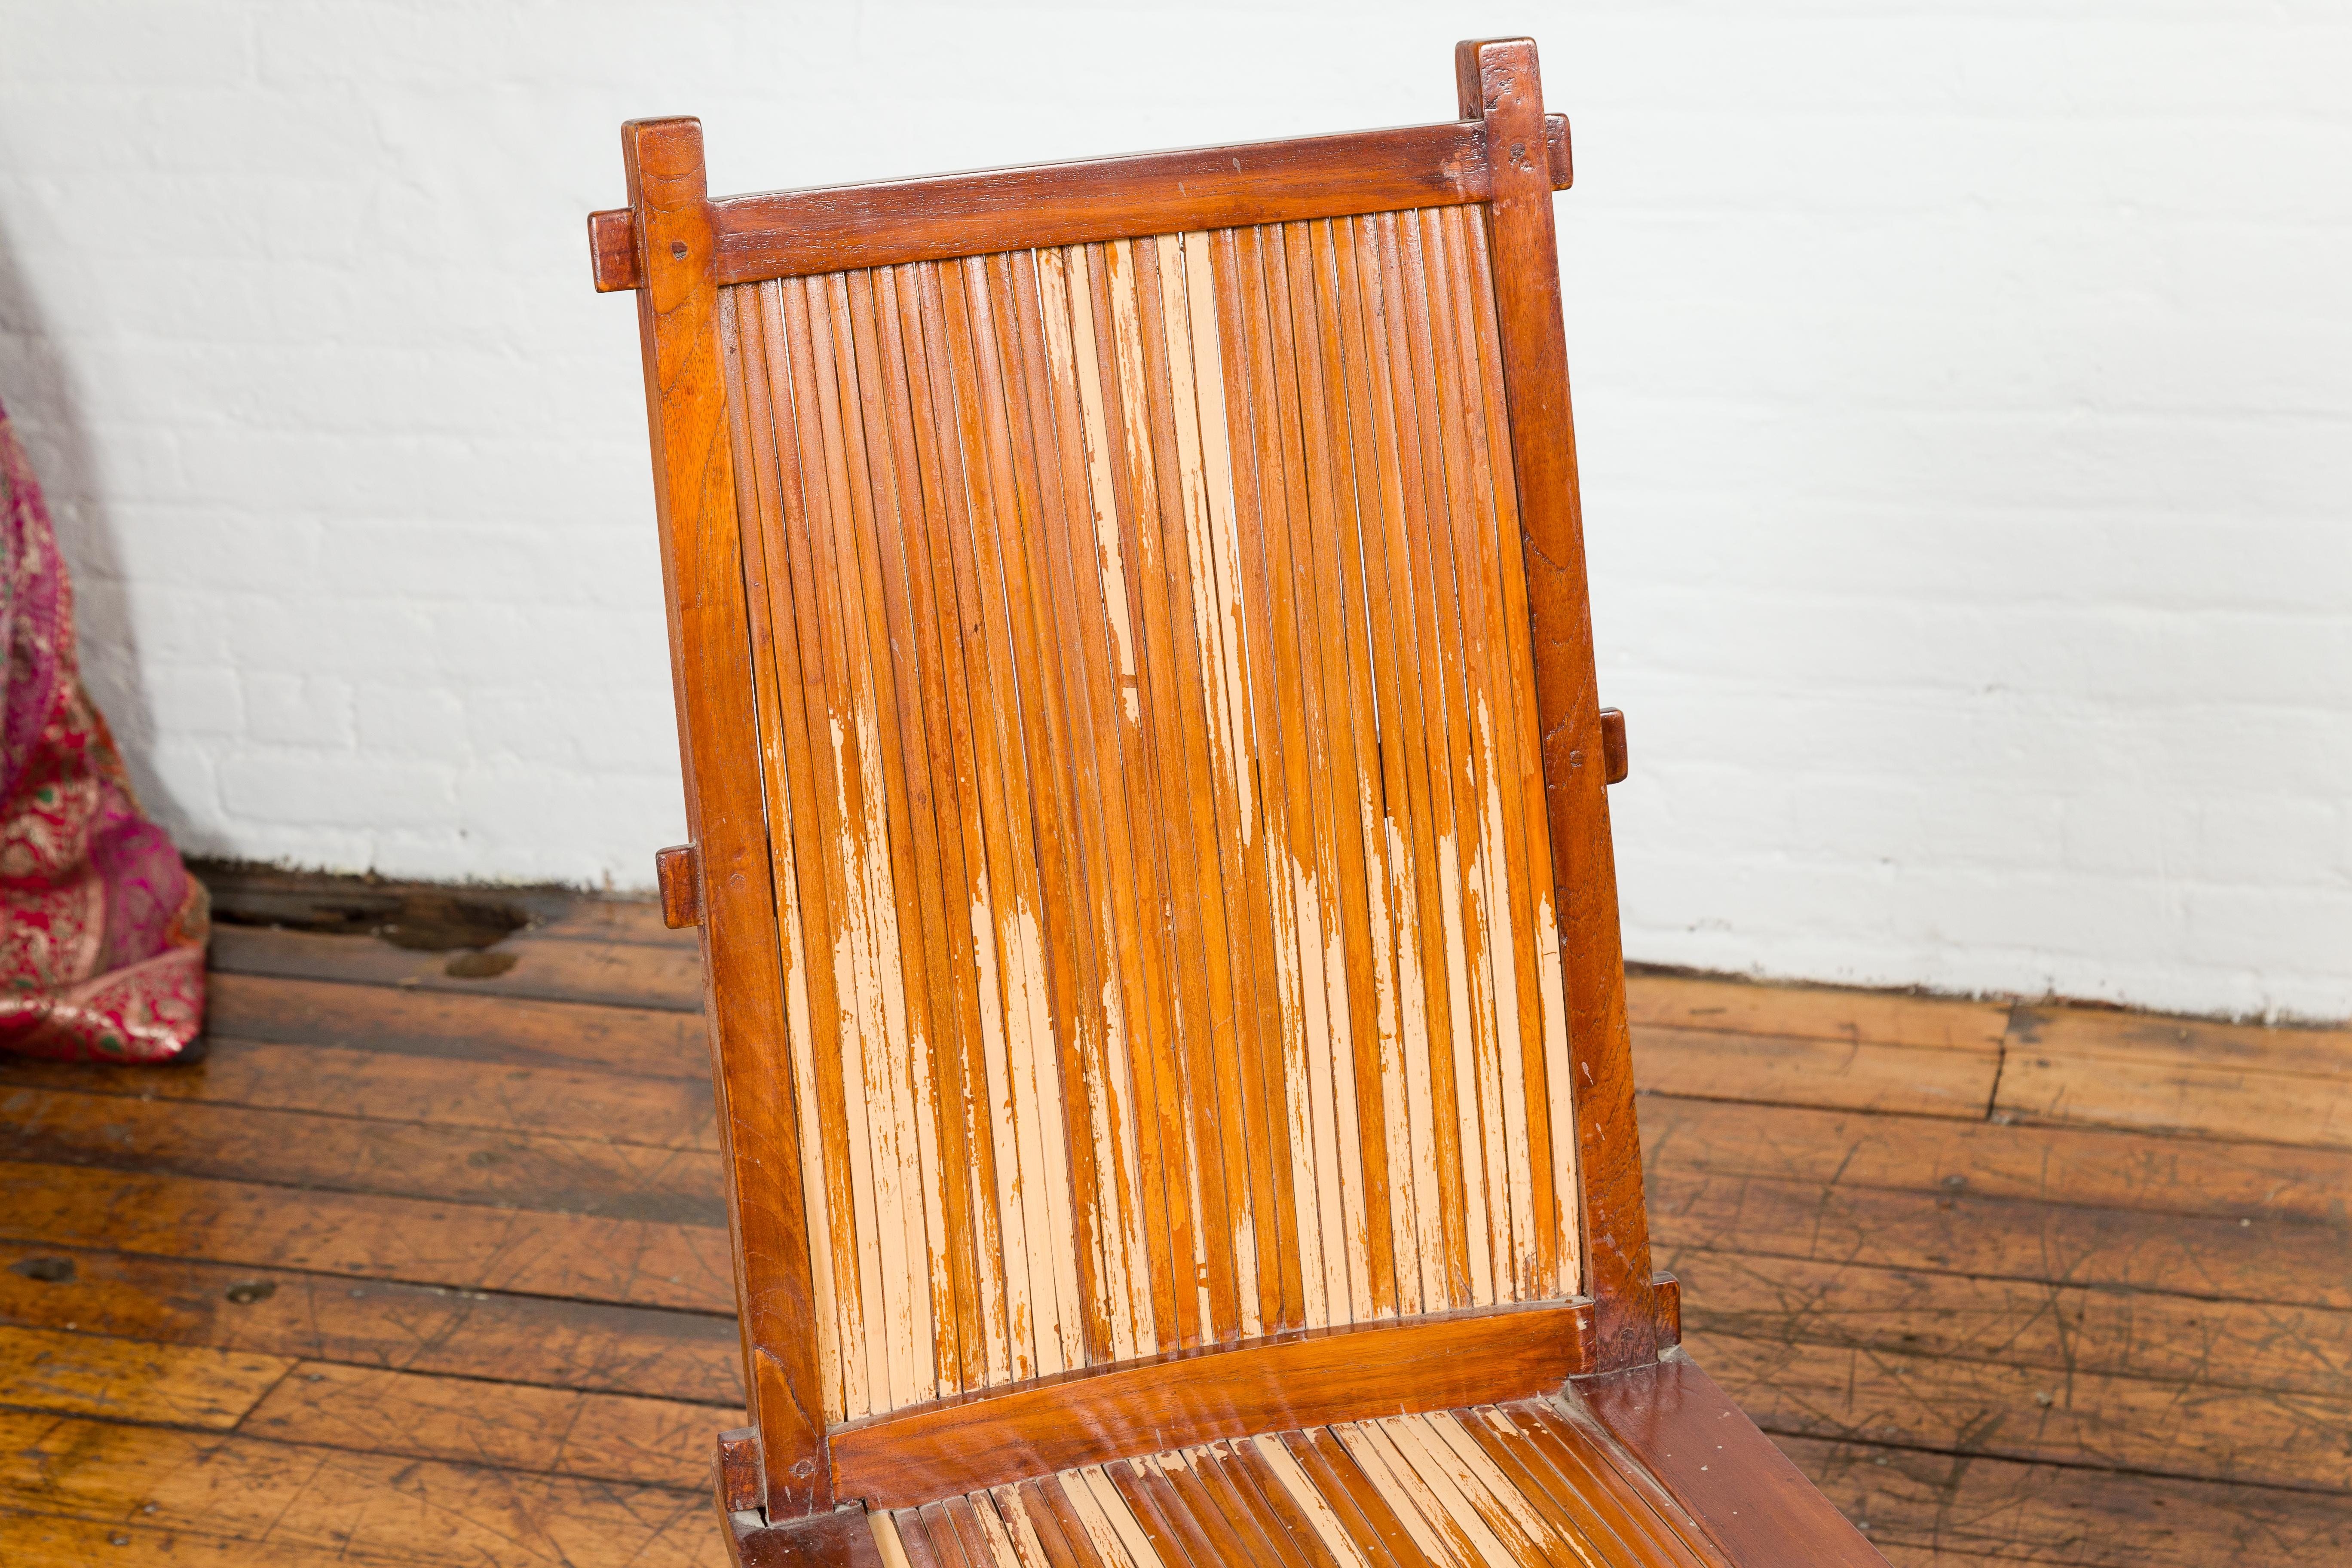 Carved Wooden Side Chairs with Bamboo Slats, Distressed Finish and Tapered Legs, a Pair For Sale